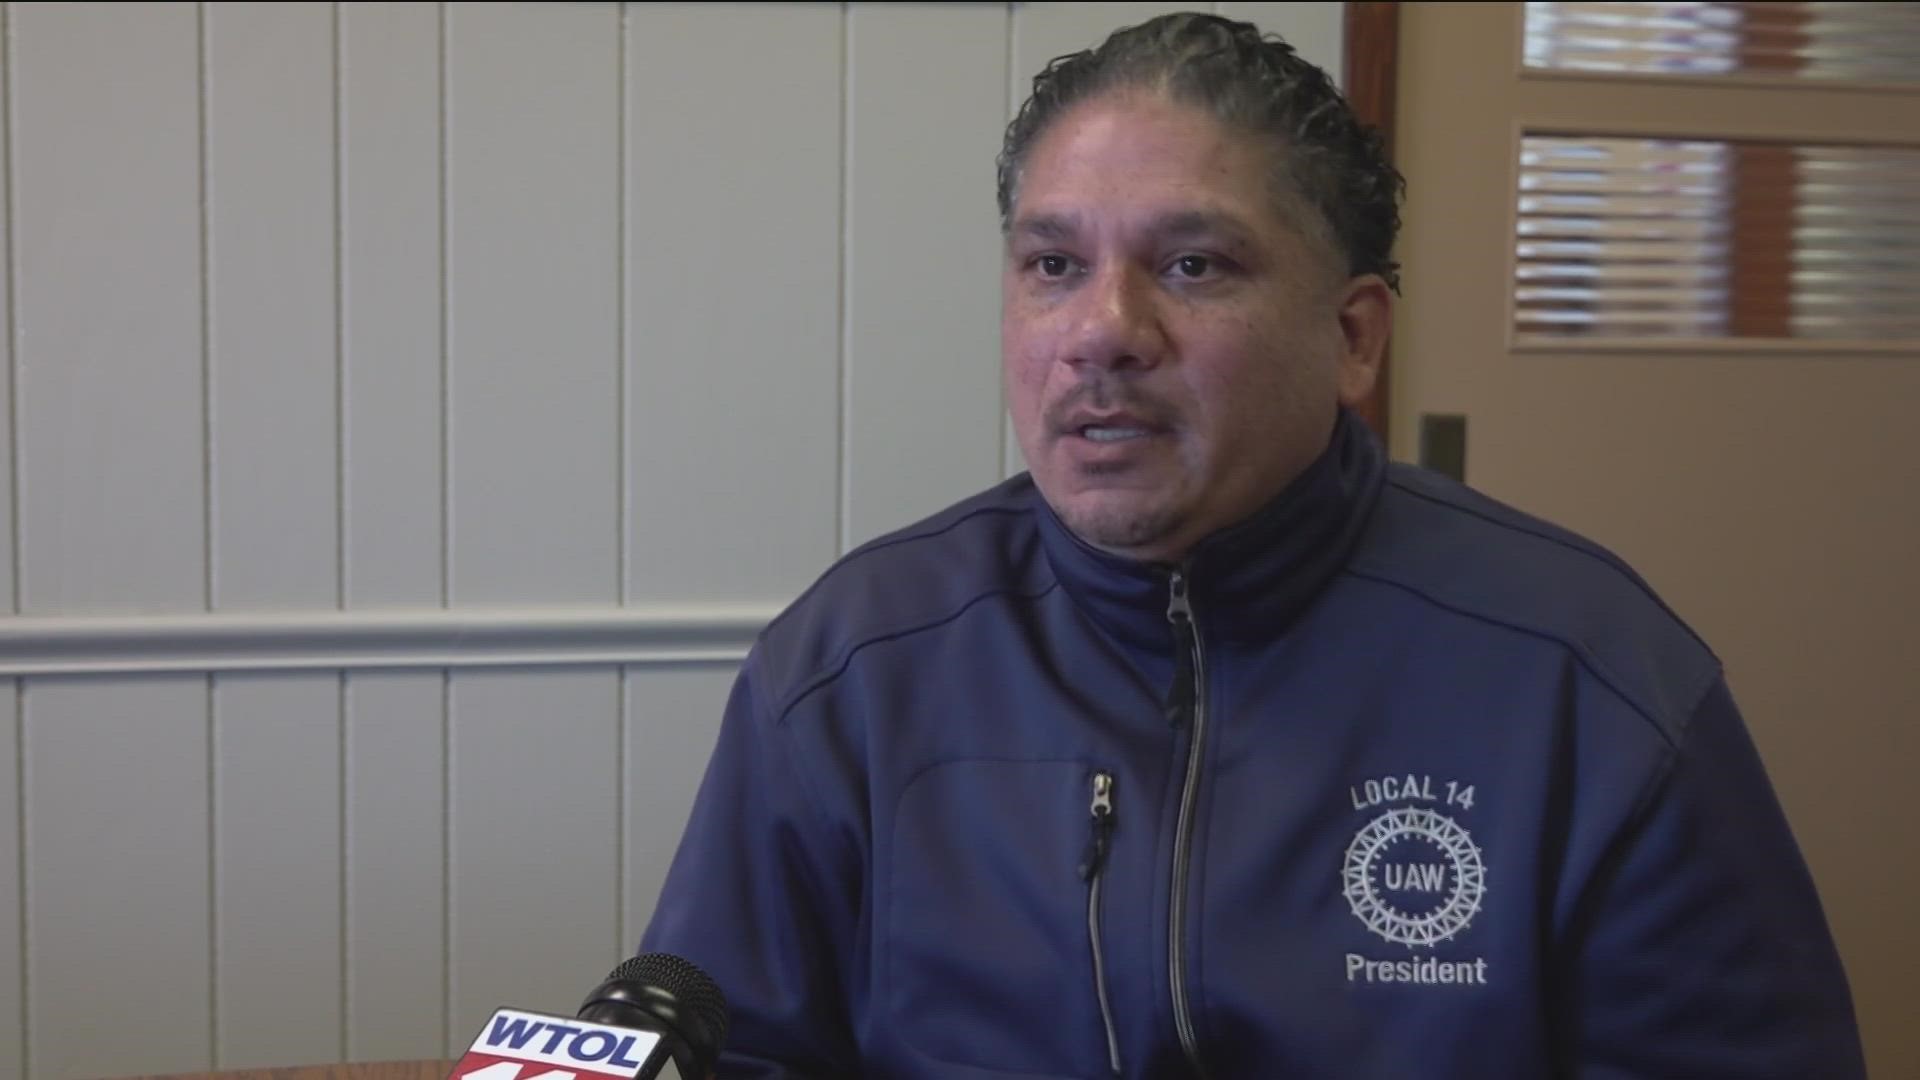 UAW Local 14 members say they've been falsely accused of unemployment fraud.